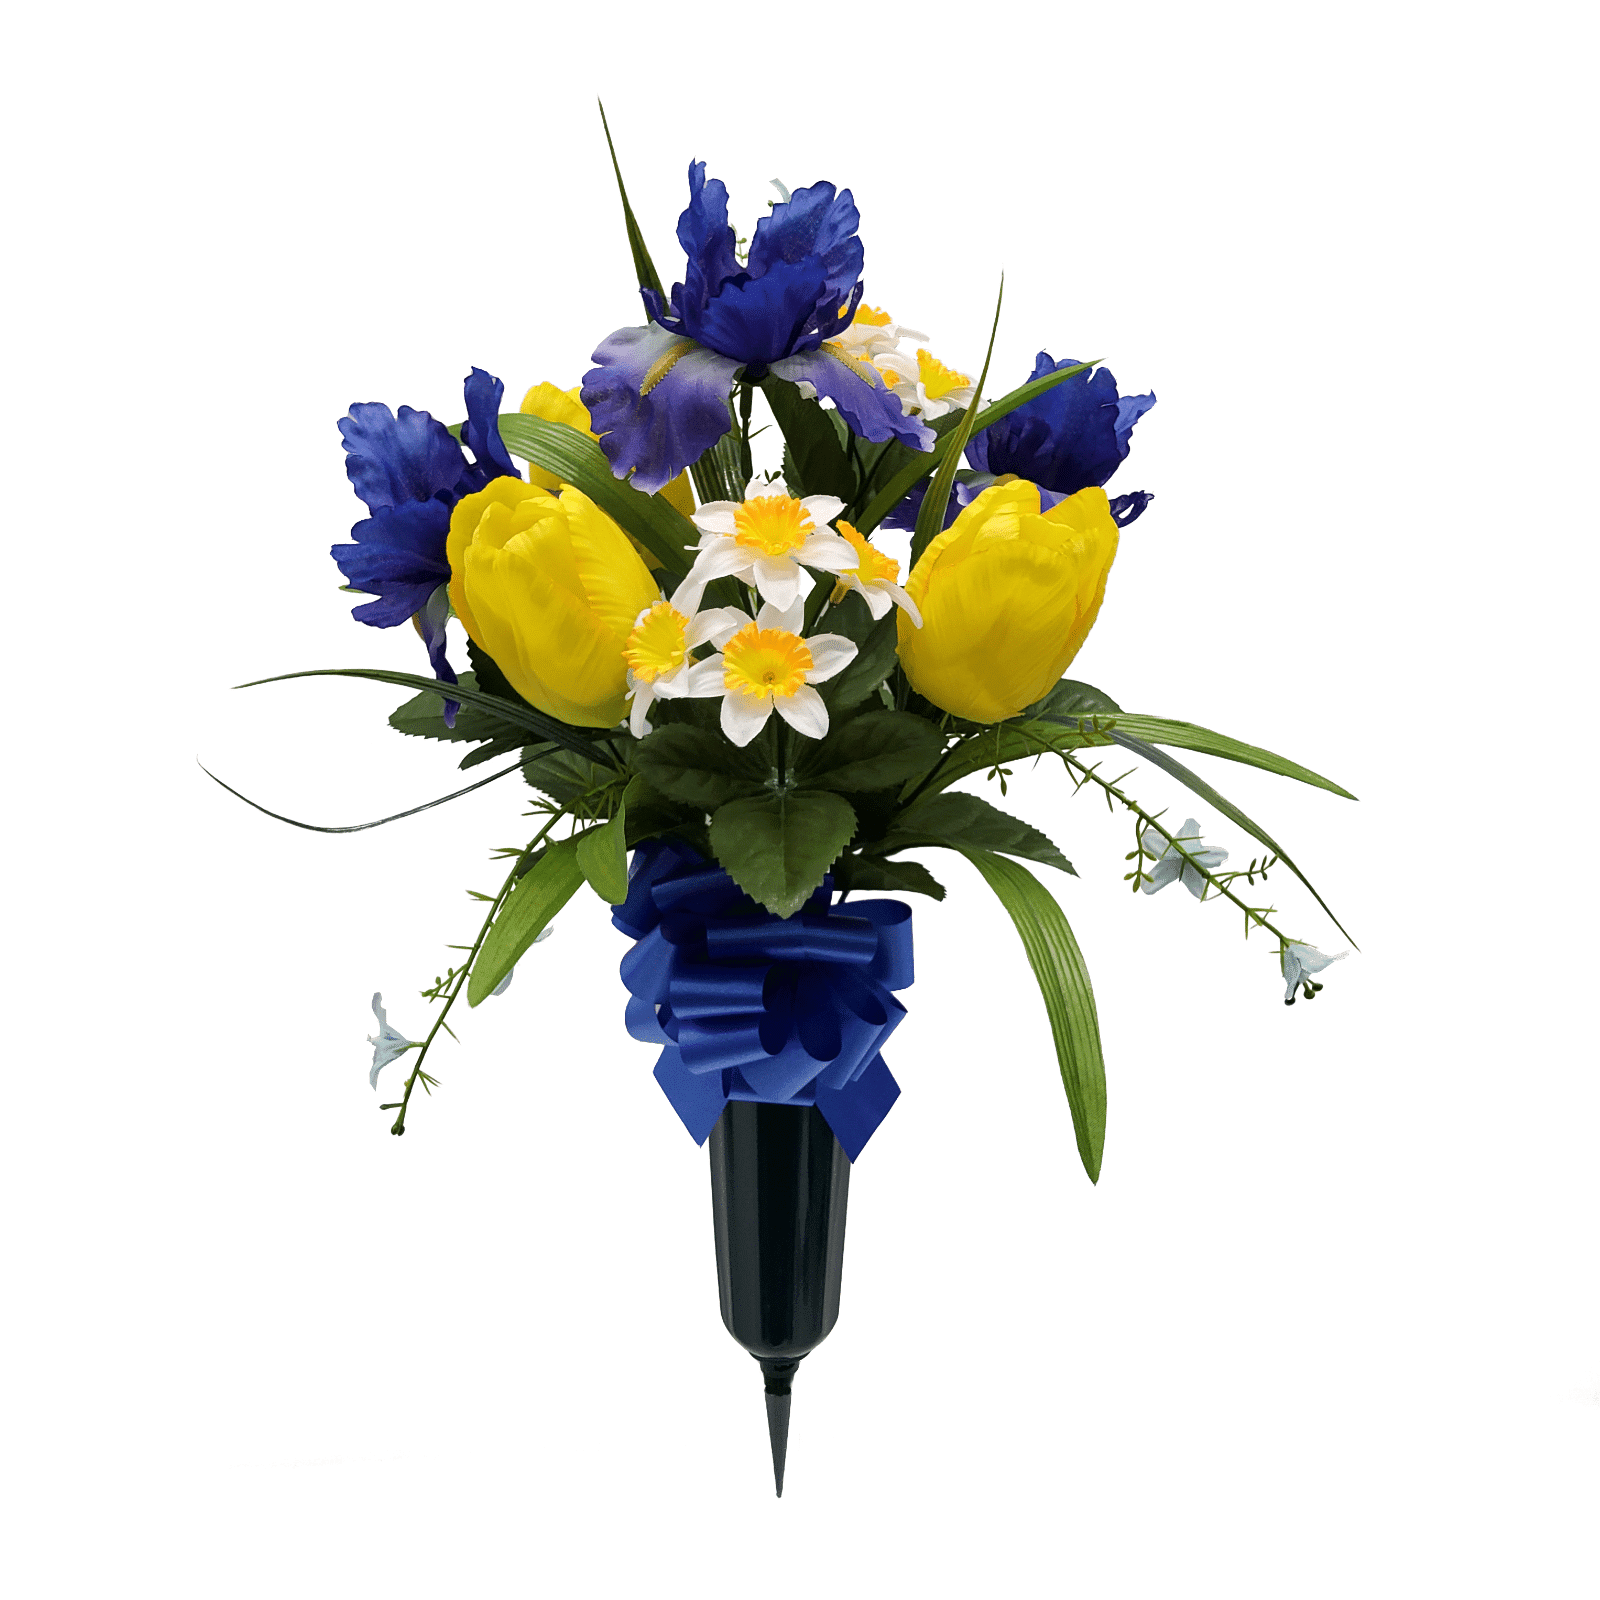 Mainstays 20 Artificial Flower, Tulip and Iris, Cemetery Vase, Yellow and Blue Color.